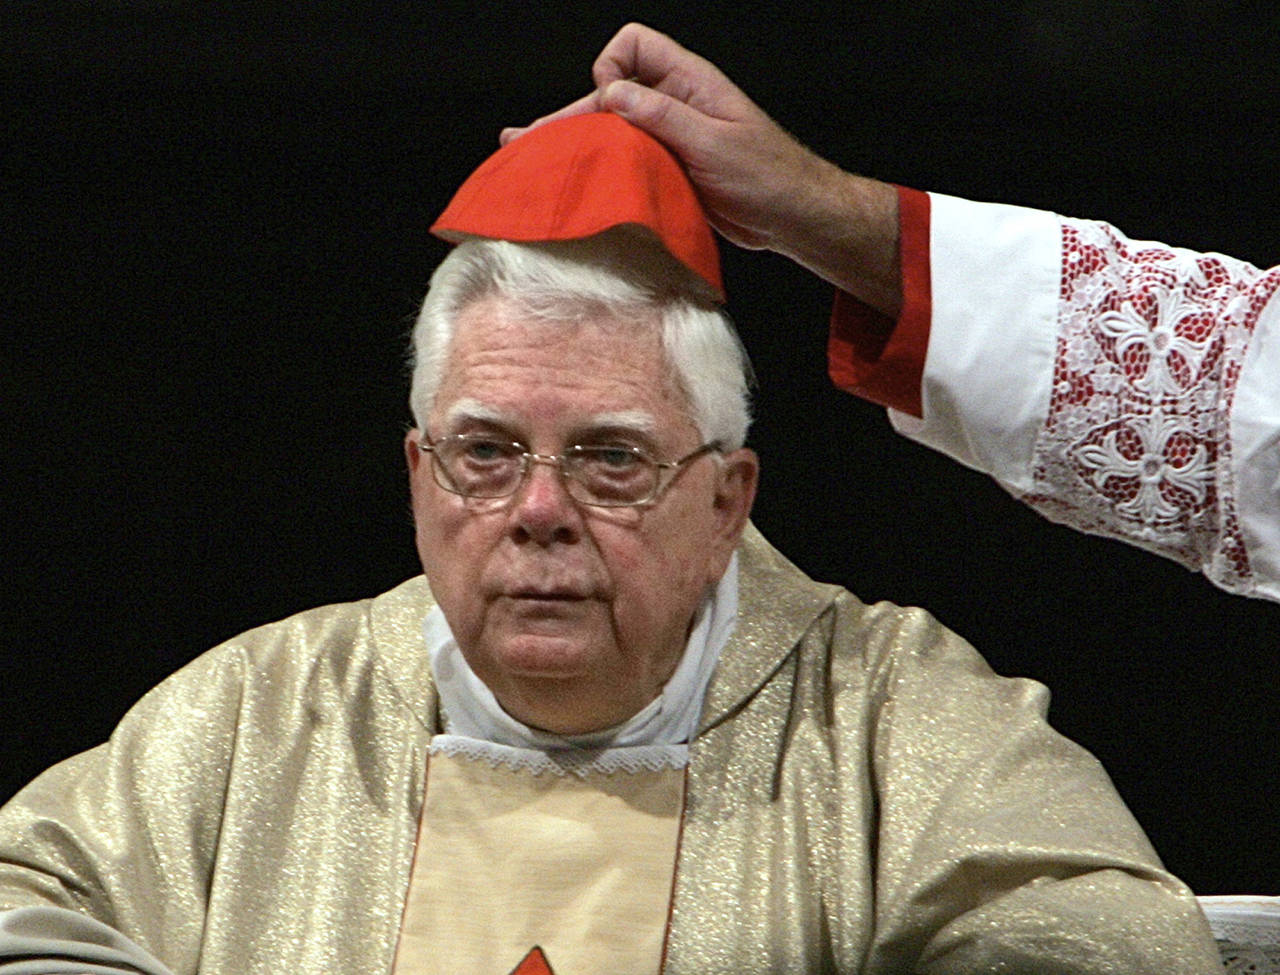 In this 2004 photo, Cardinal Bernard Law has his skull cap adjusted during the ceremony for Our Lady of the Snows, in St. Mary Major’s Basilica in Rome, Italy. (AP Photo/Domenico Stinellis, File)